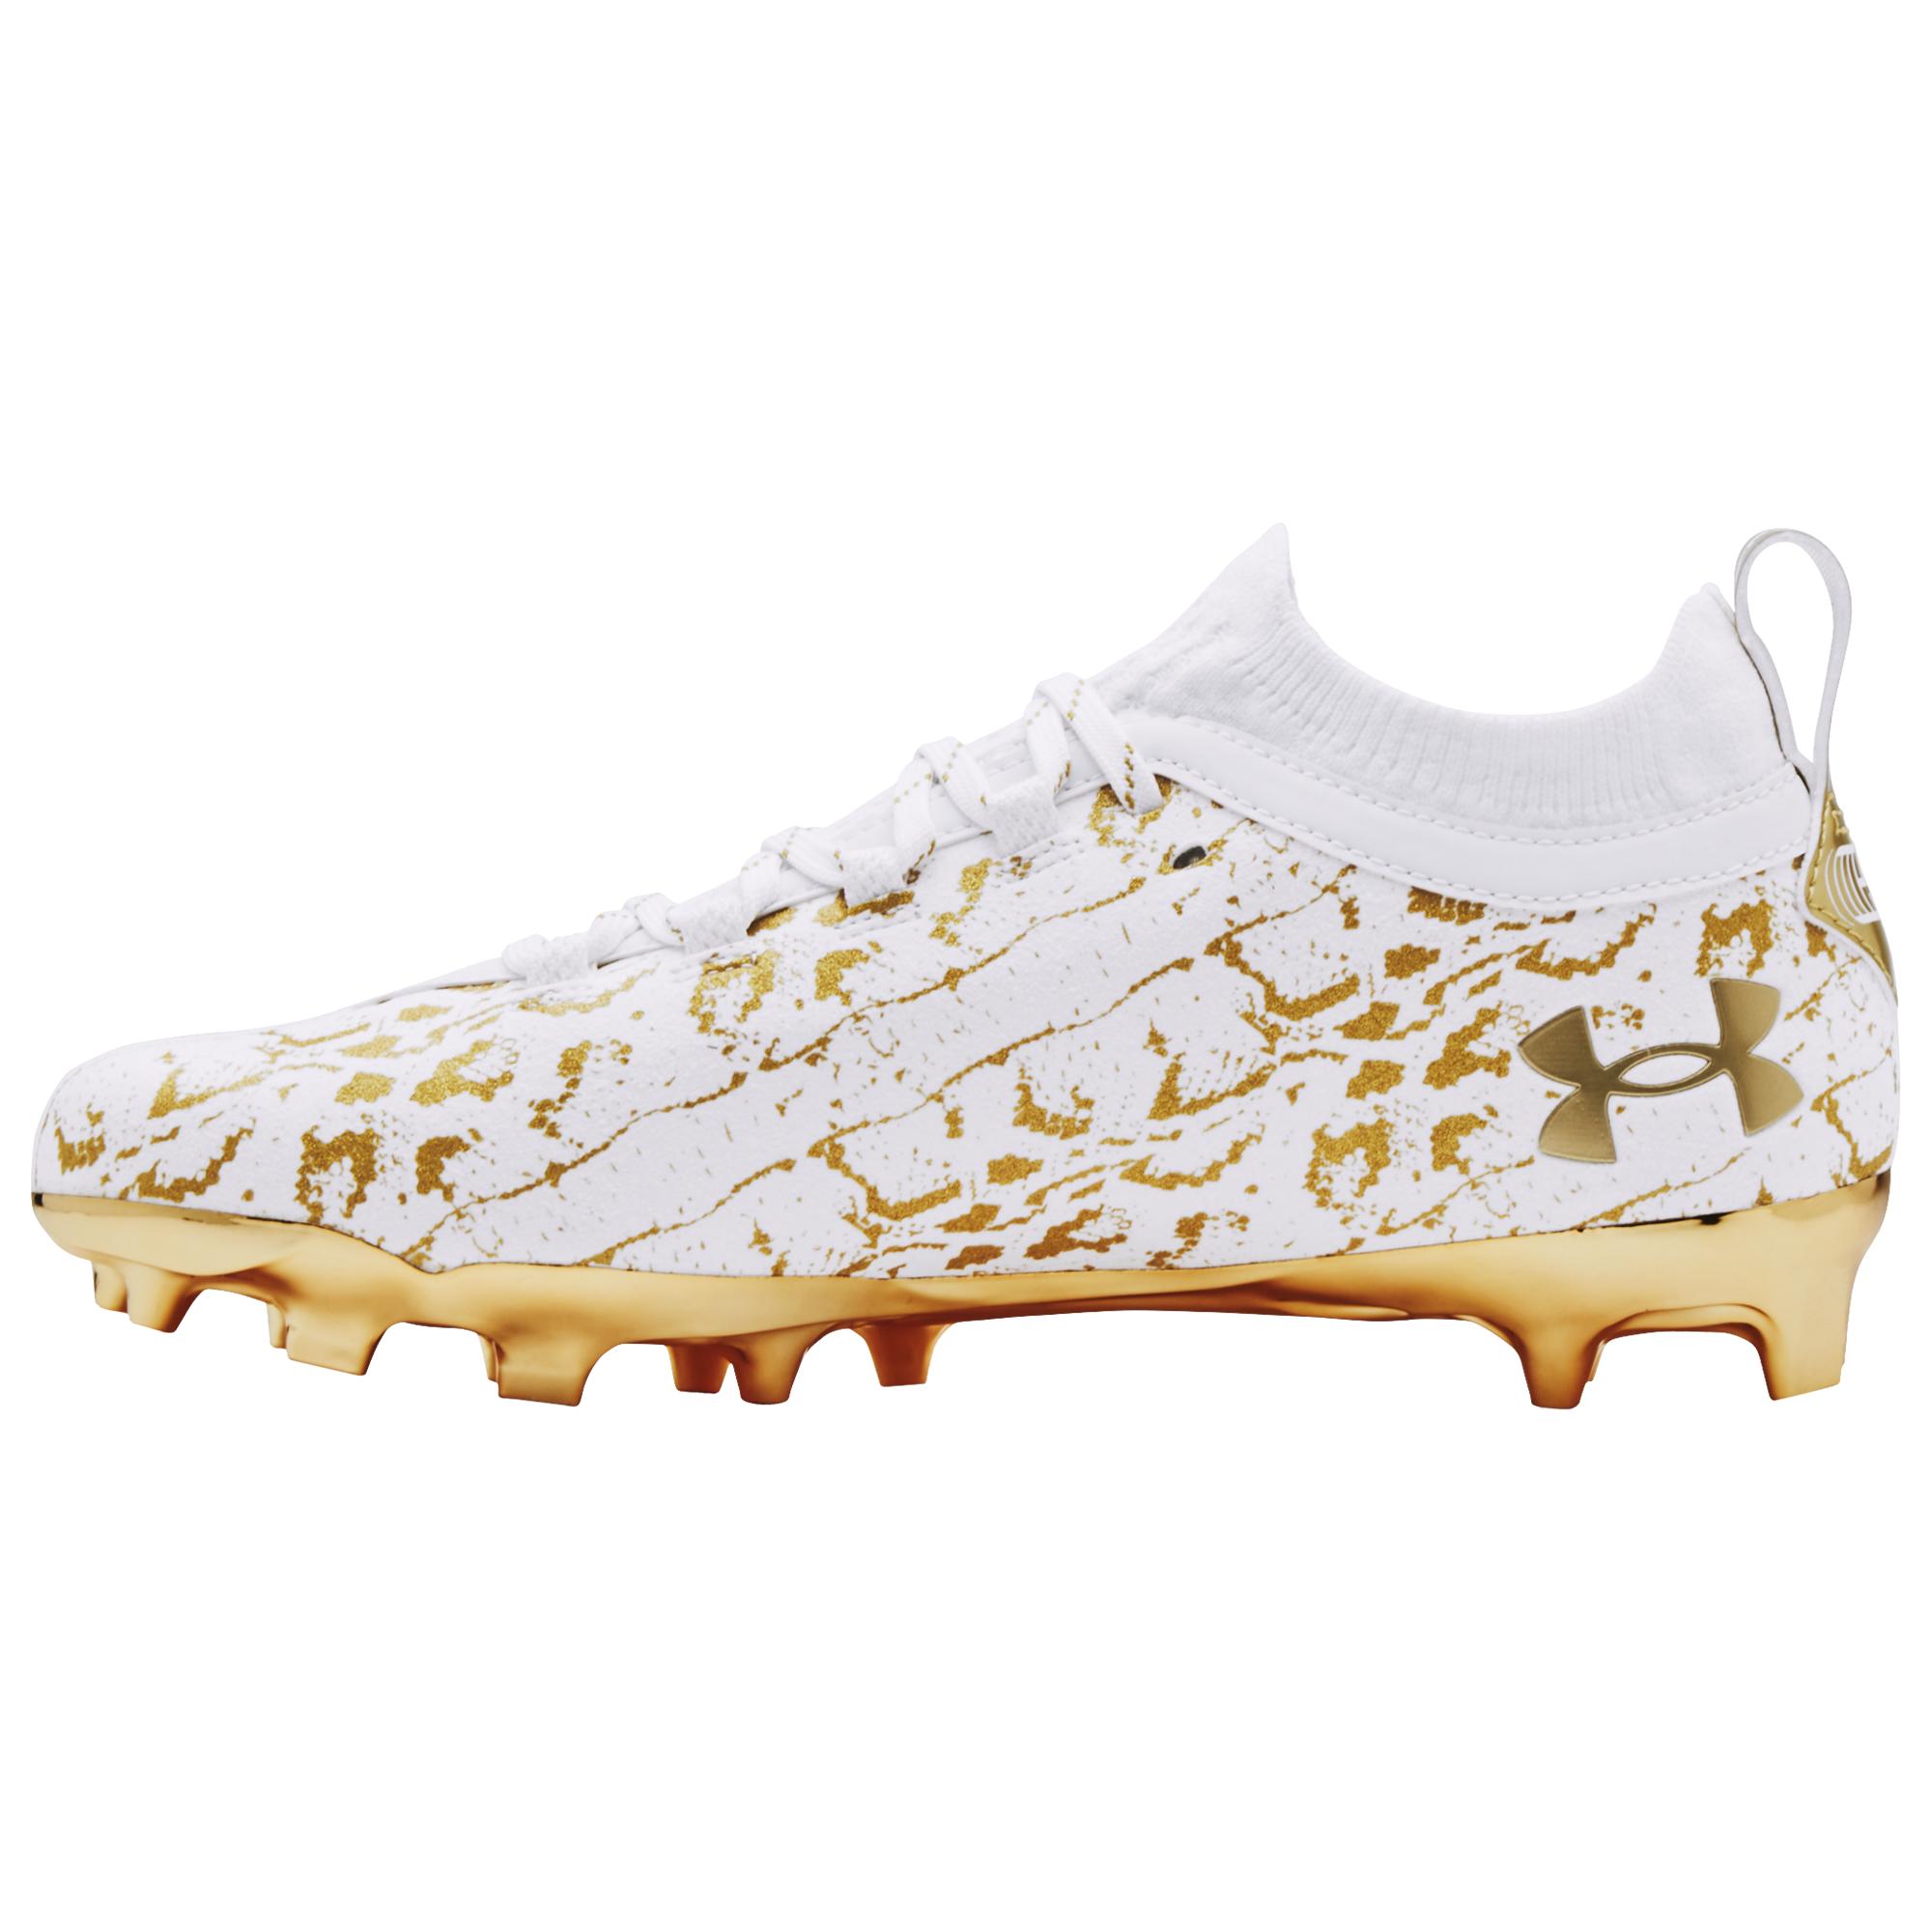 Under Armour Spotlight Cleats All White Discount Compare, 52% OFF |  irradia.com.es